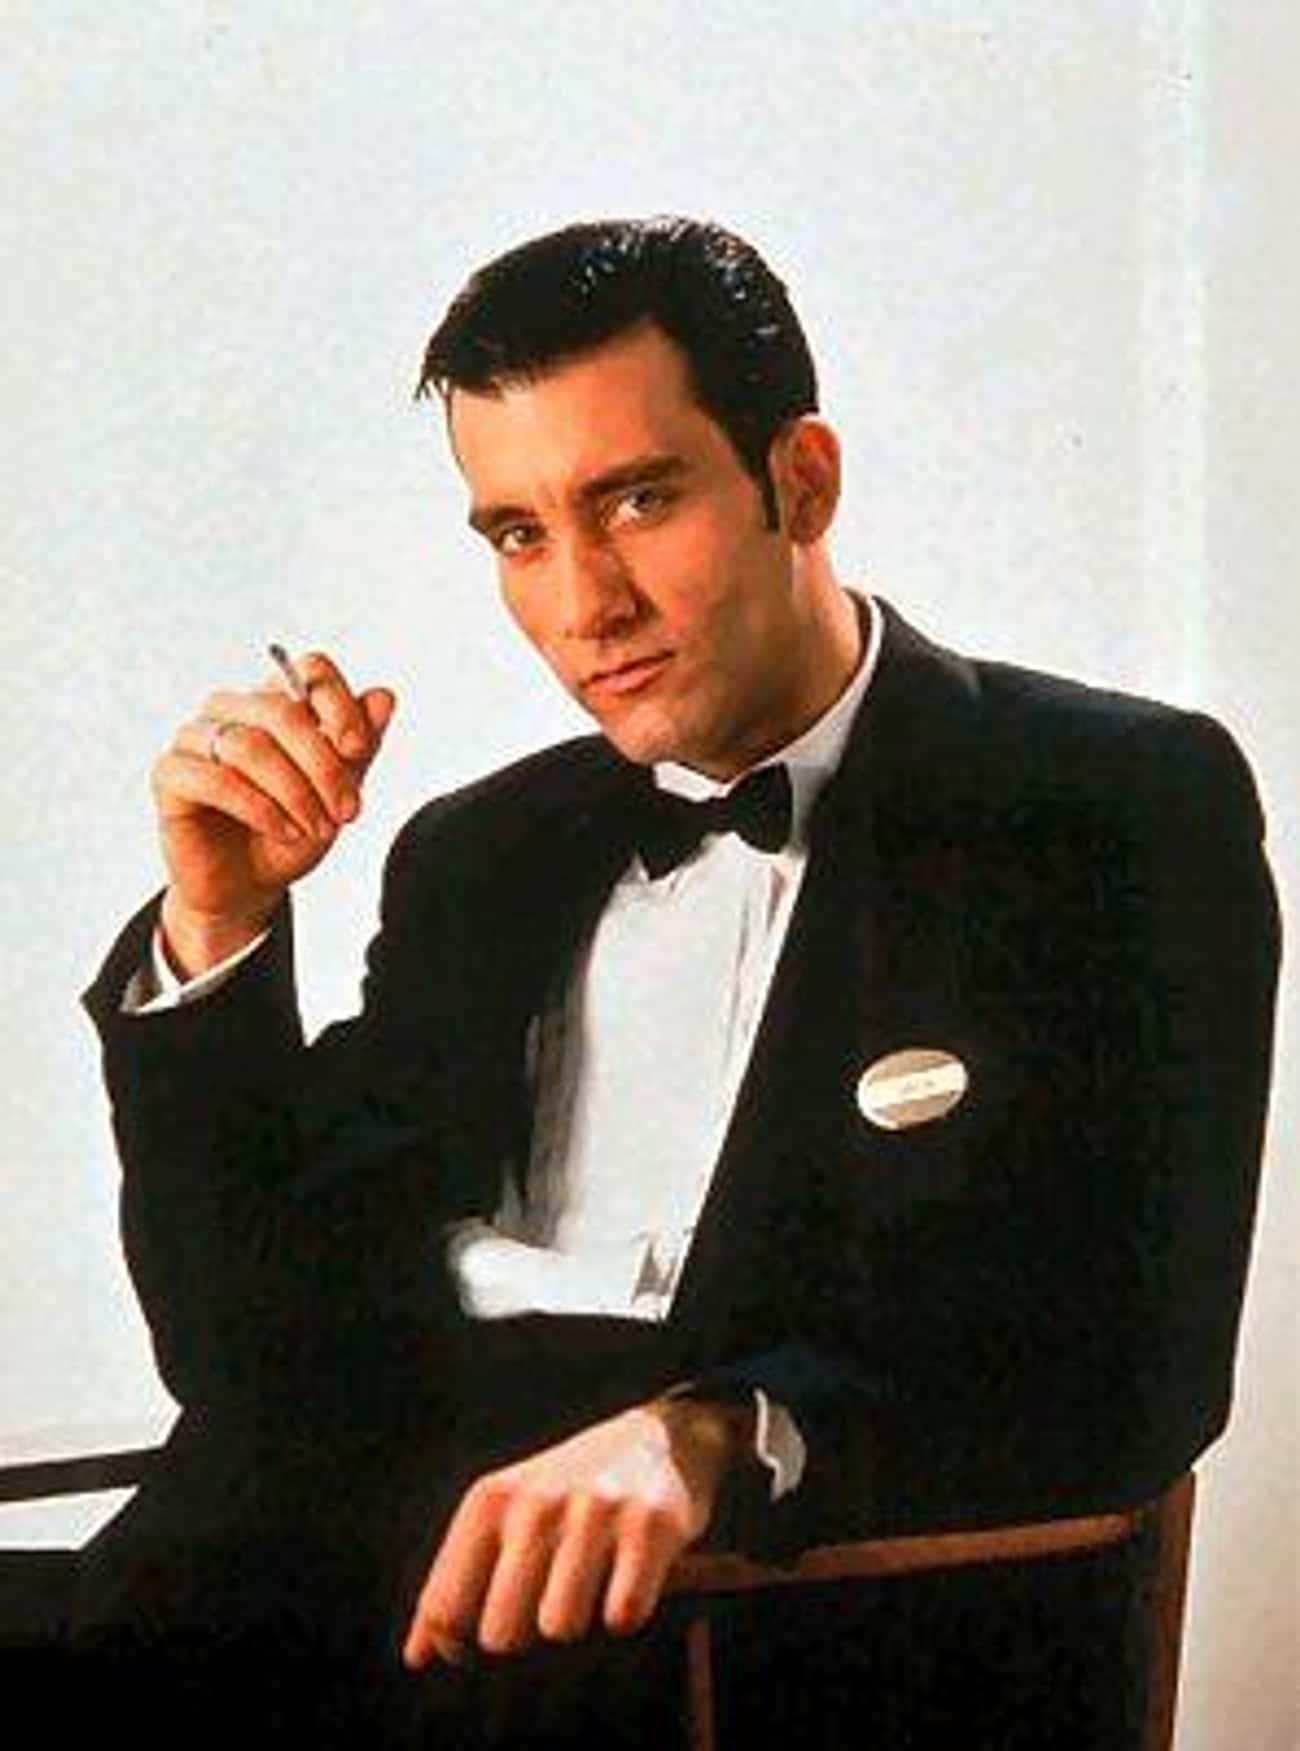 Young Clive Owen in Black Tux and Bowtie